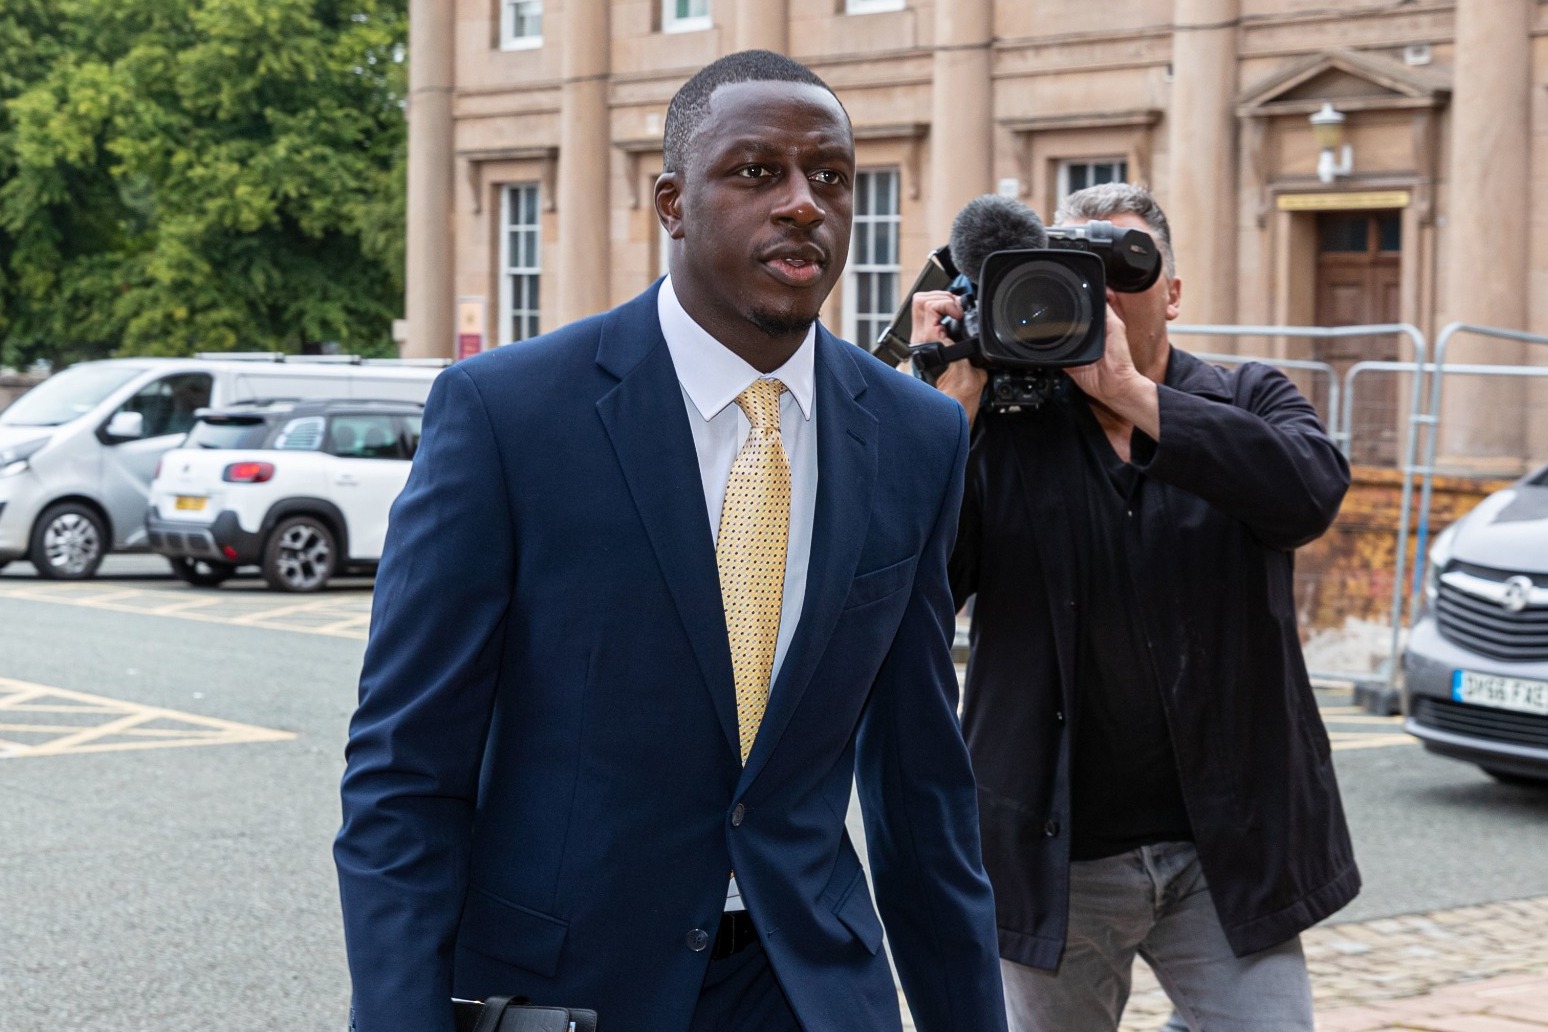 Benjamin Mendy told accuser I have had sex with 10000 women court hears